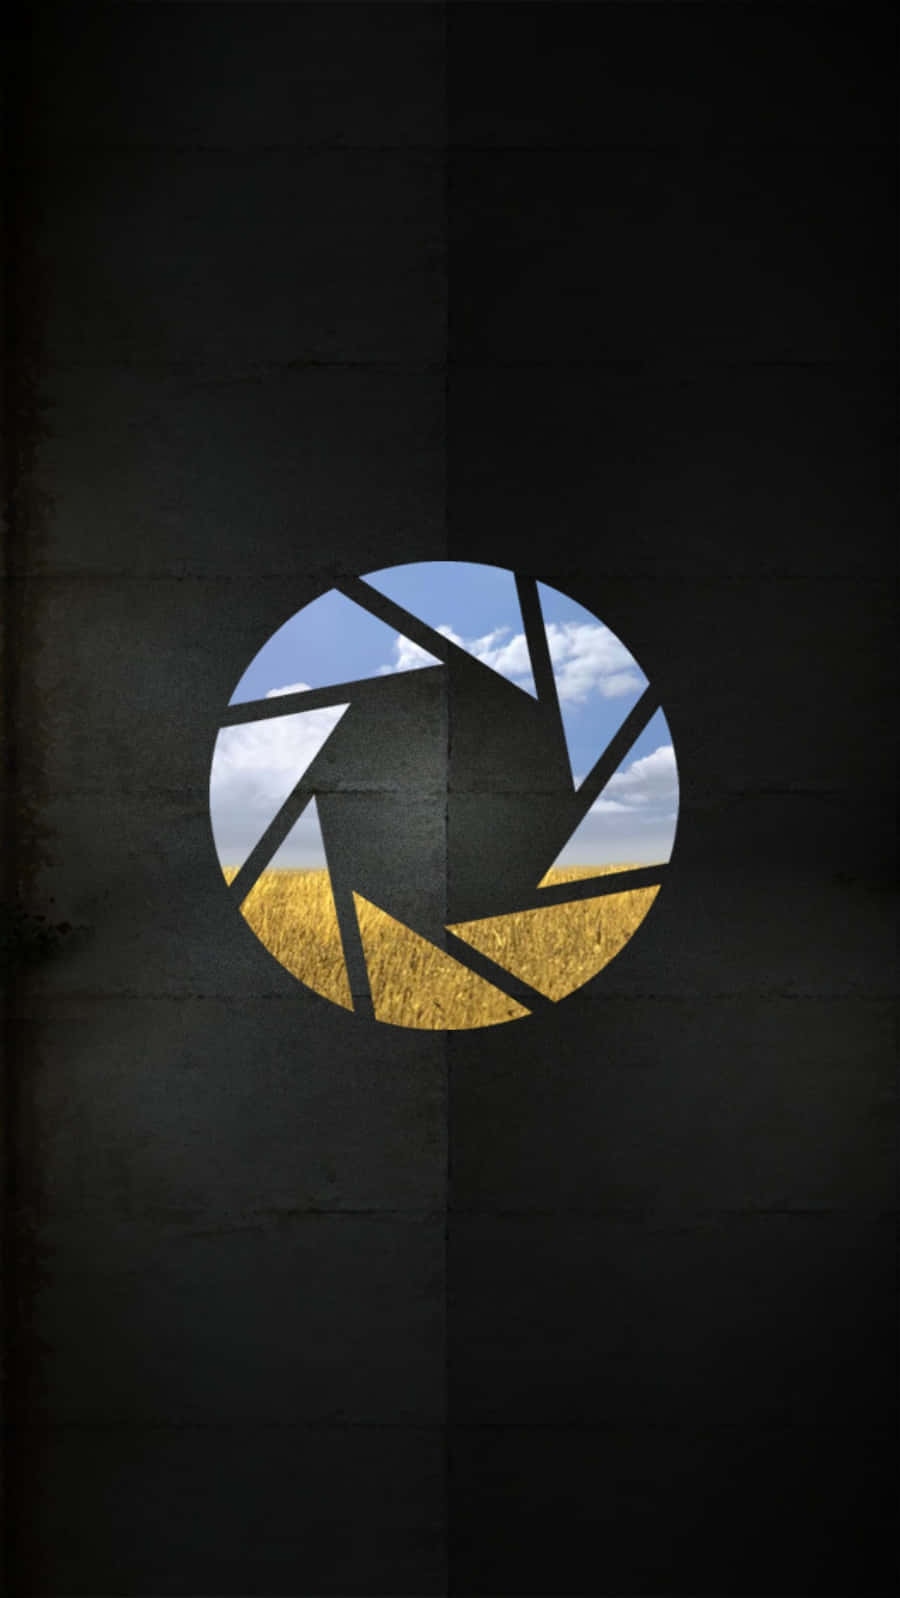 Go anywhere with Portal Iphone Wallpaper